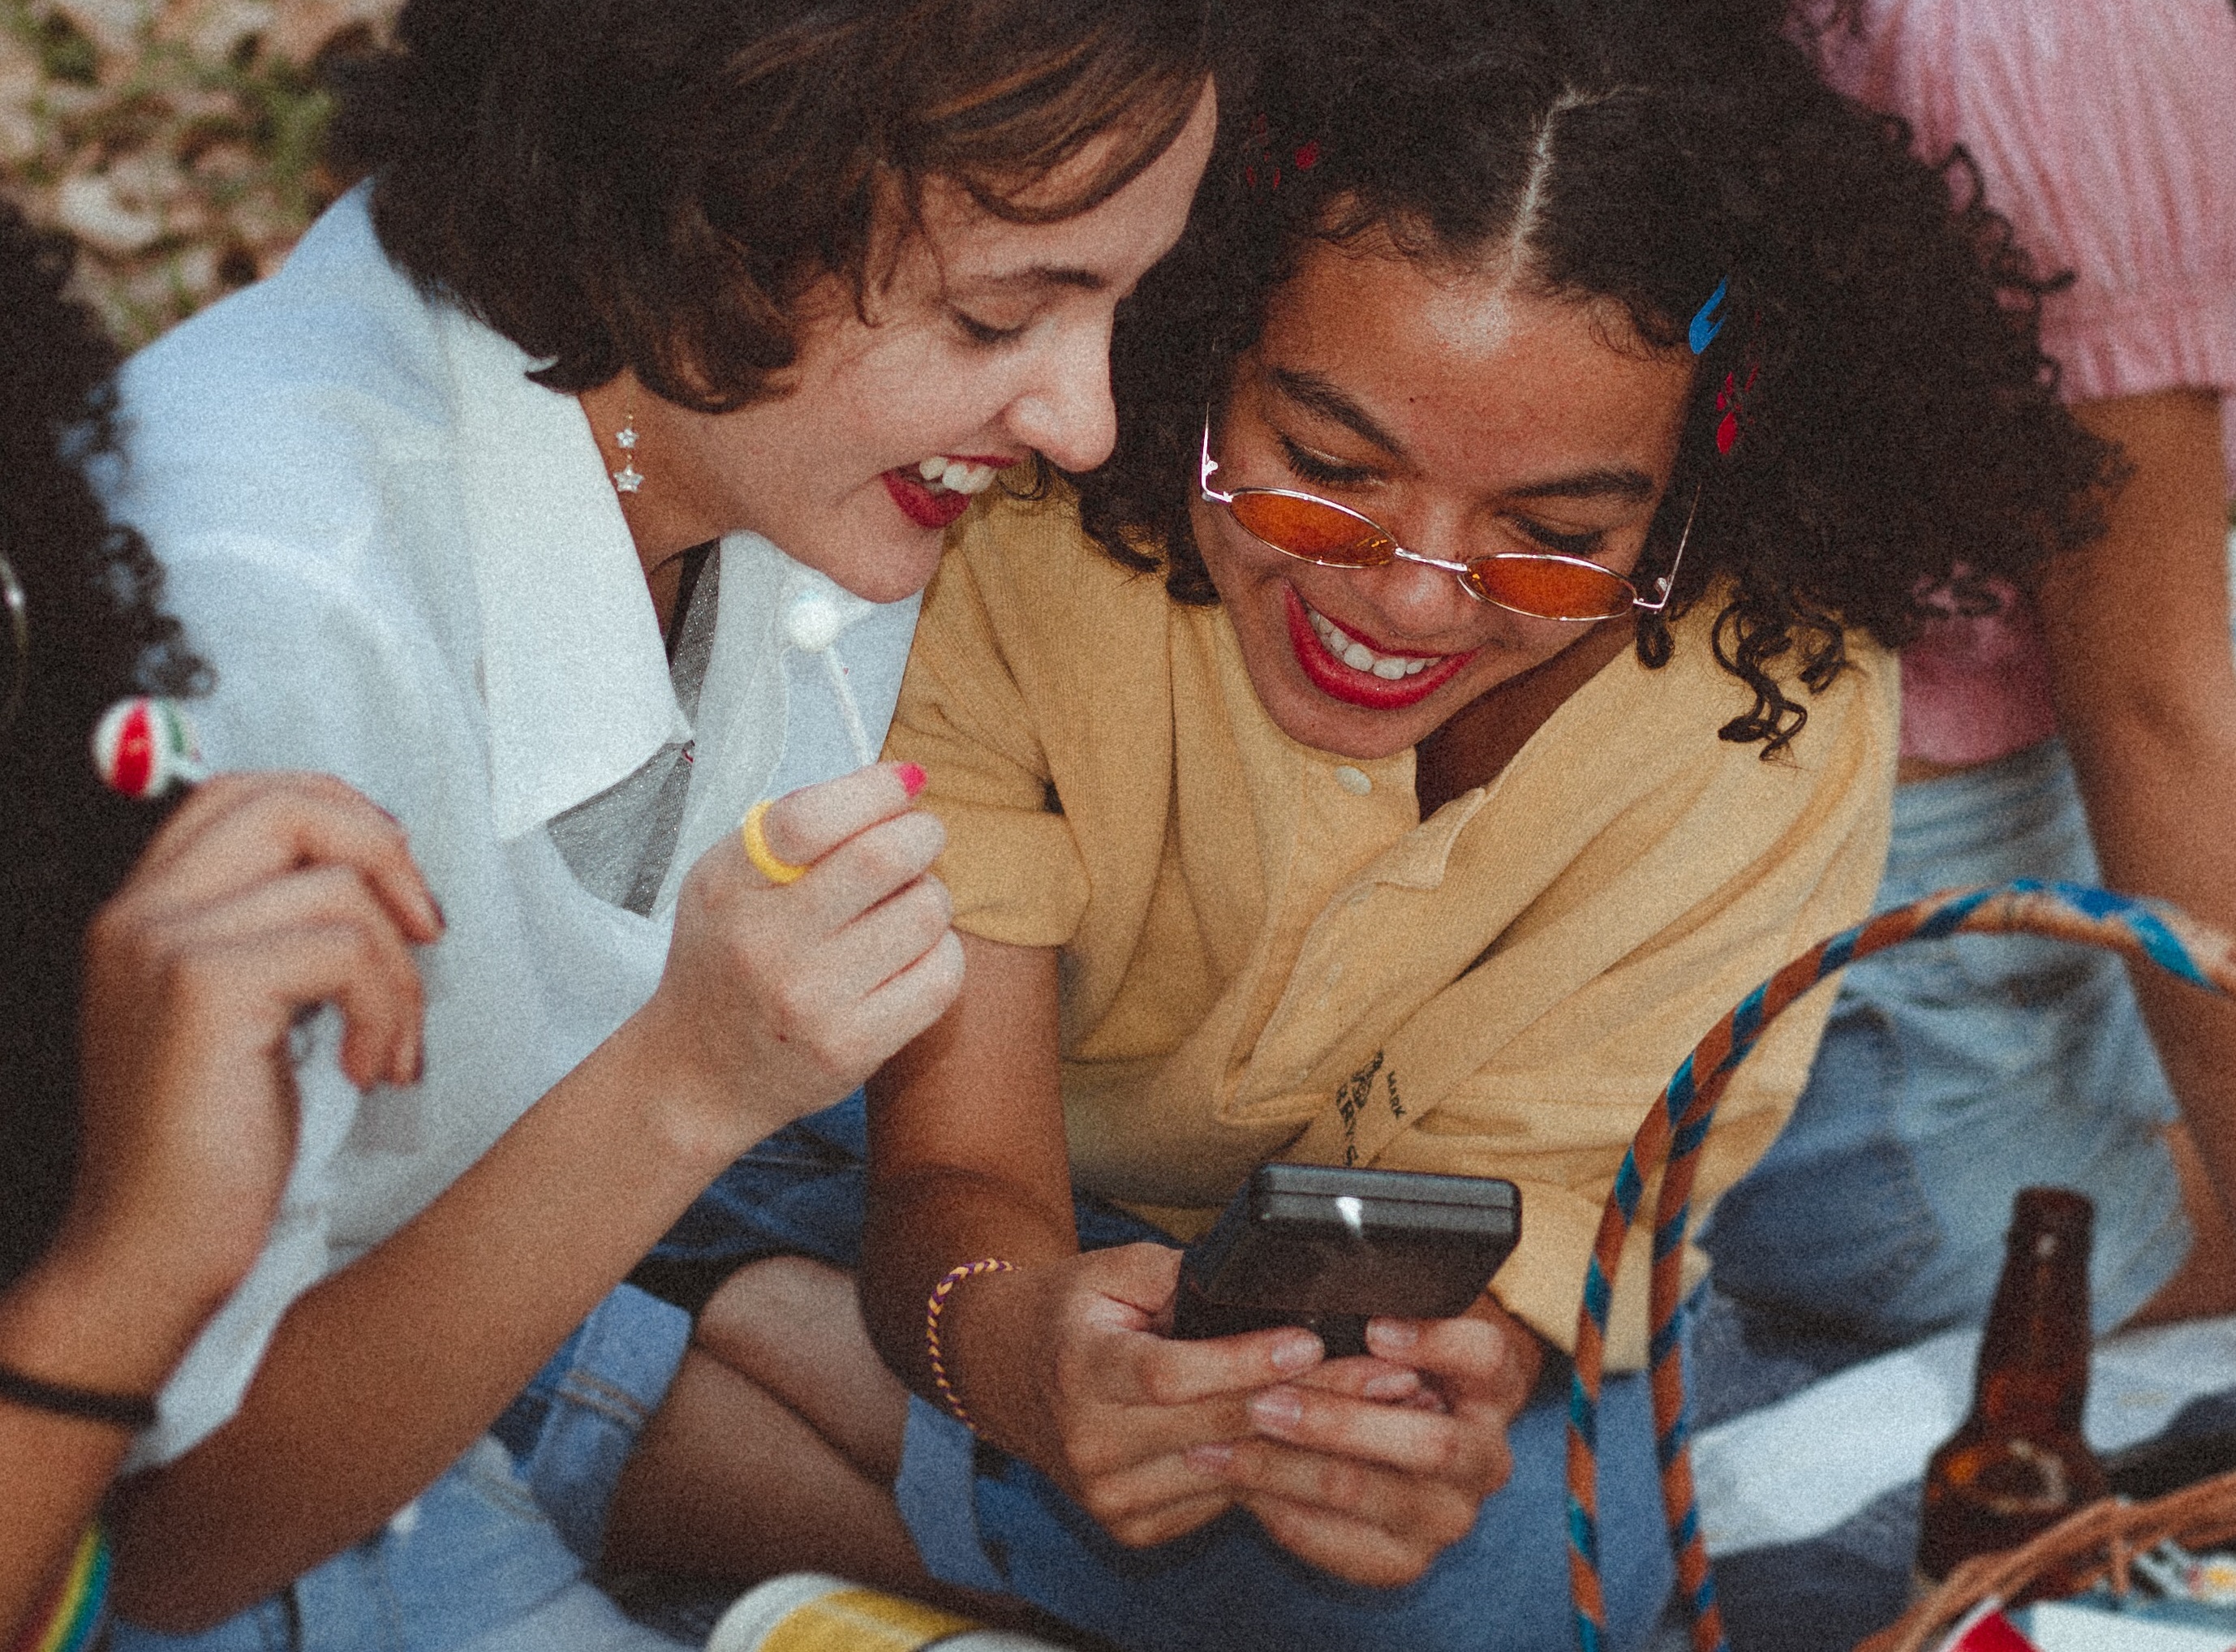  Two young women look down at a phone, smiling and laughing.